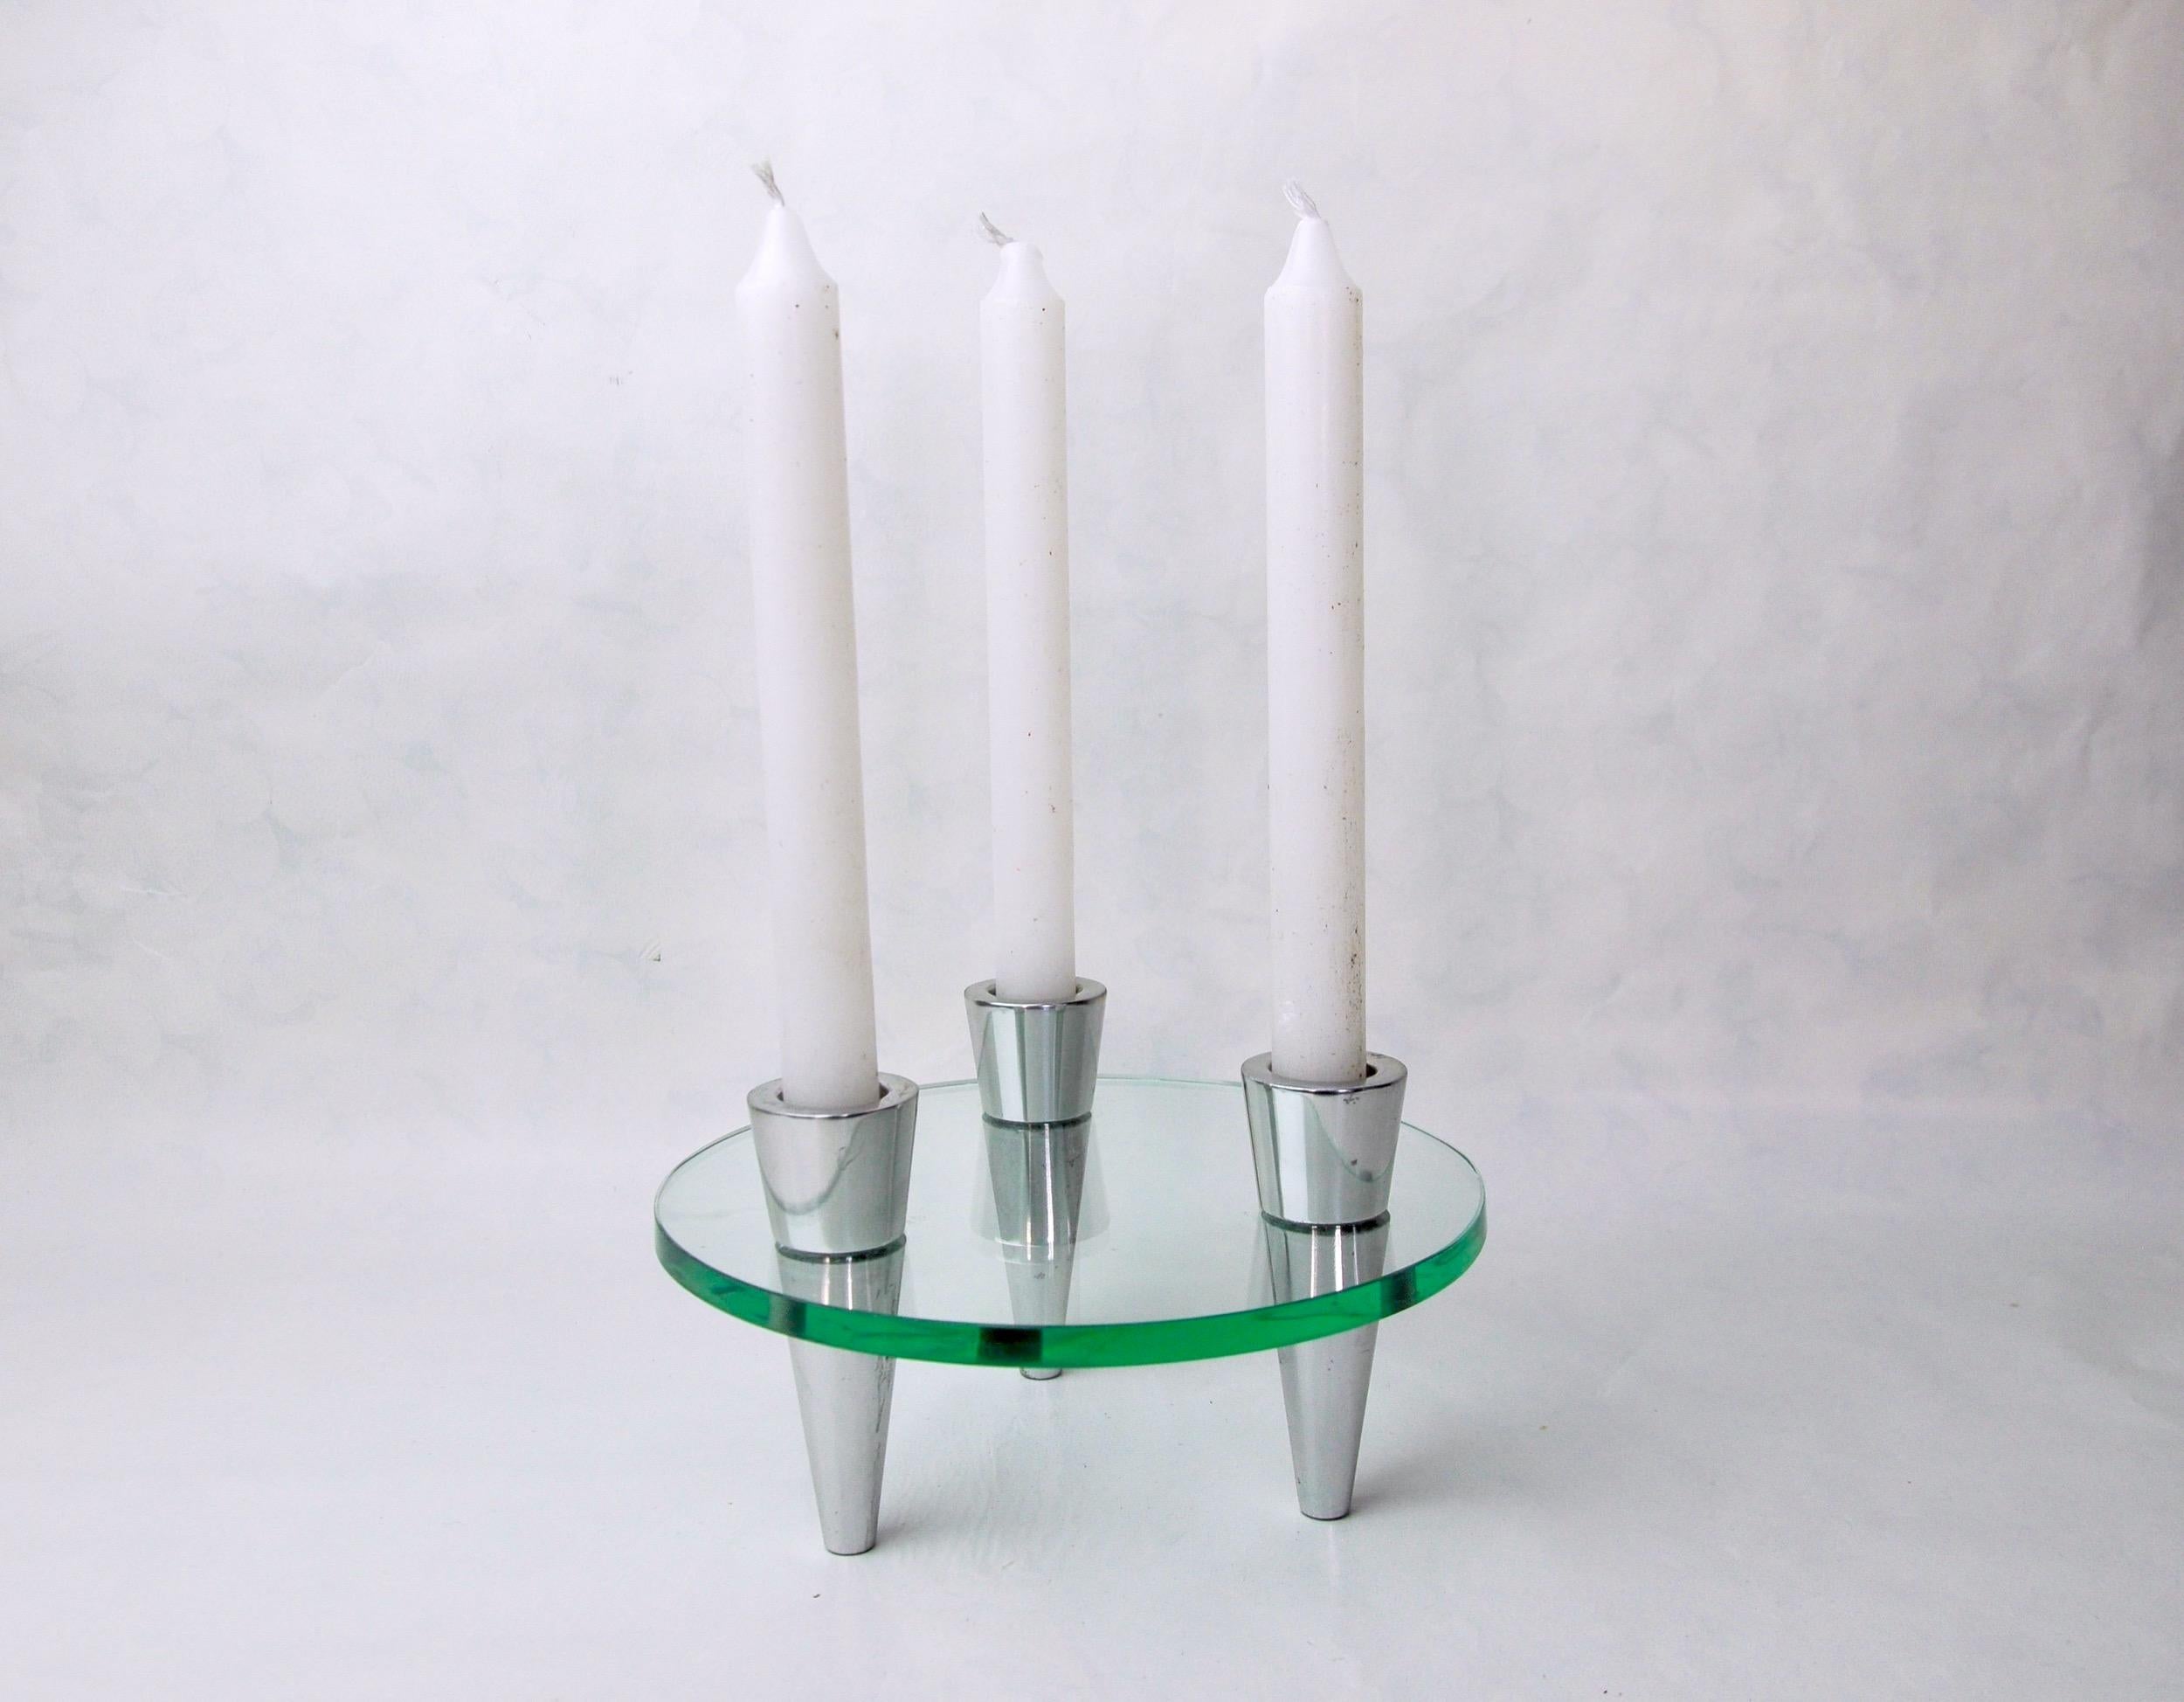 Glass circle candle holders, 3 flames, Denmark, 1970.
Very beautiful scandinavian candle holder in designated glass and produced in denmark in the 1970s.
Structure in circular green that can accommodate three candles.
Superb design object will